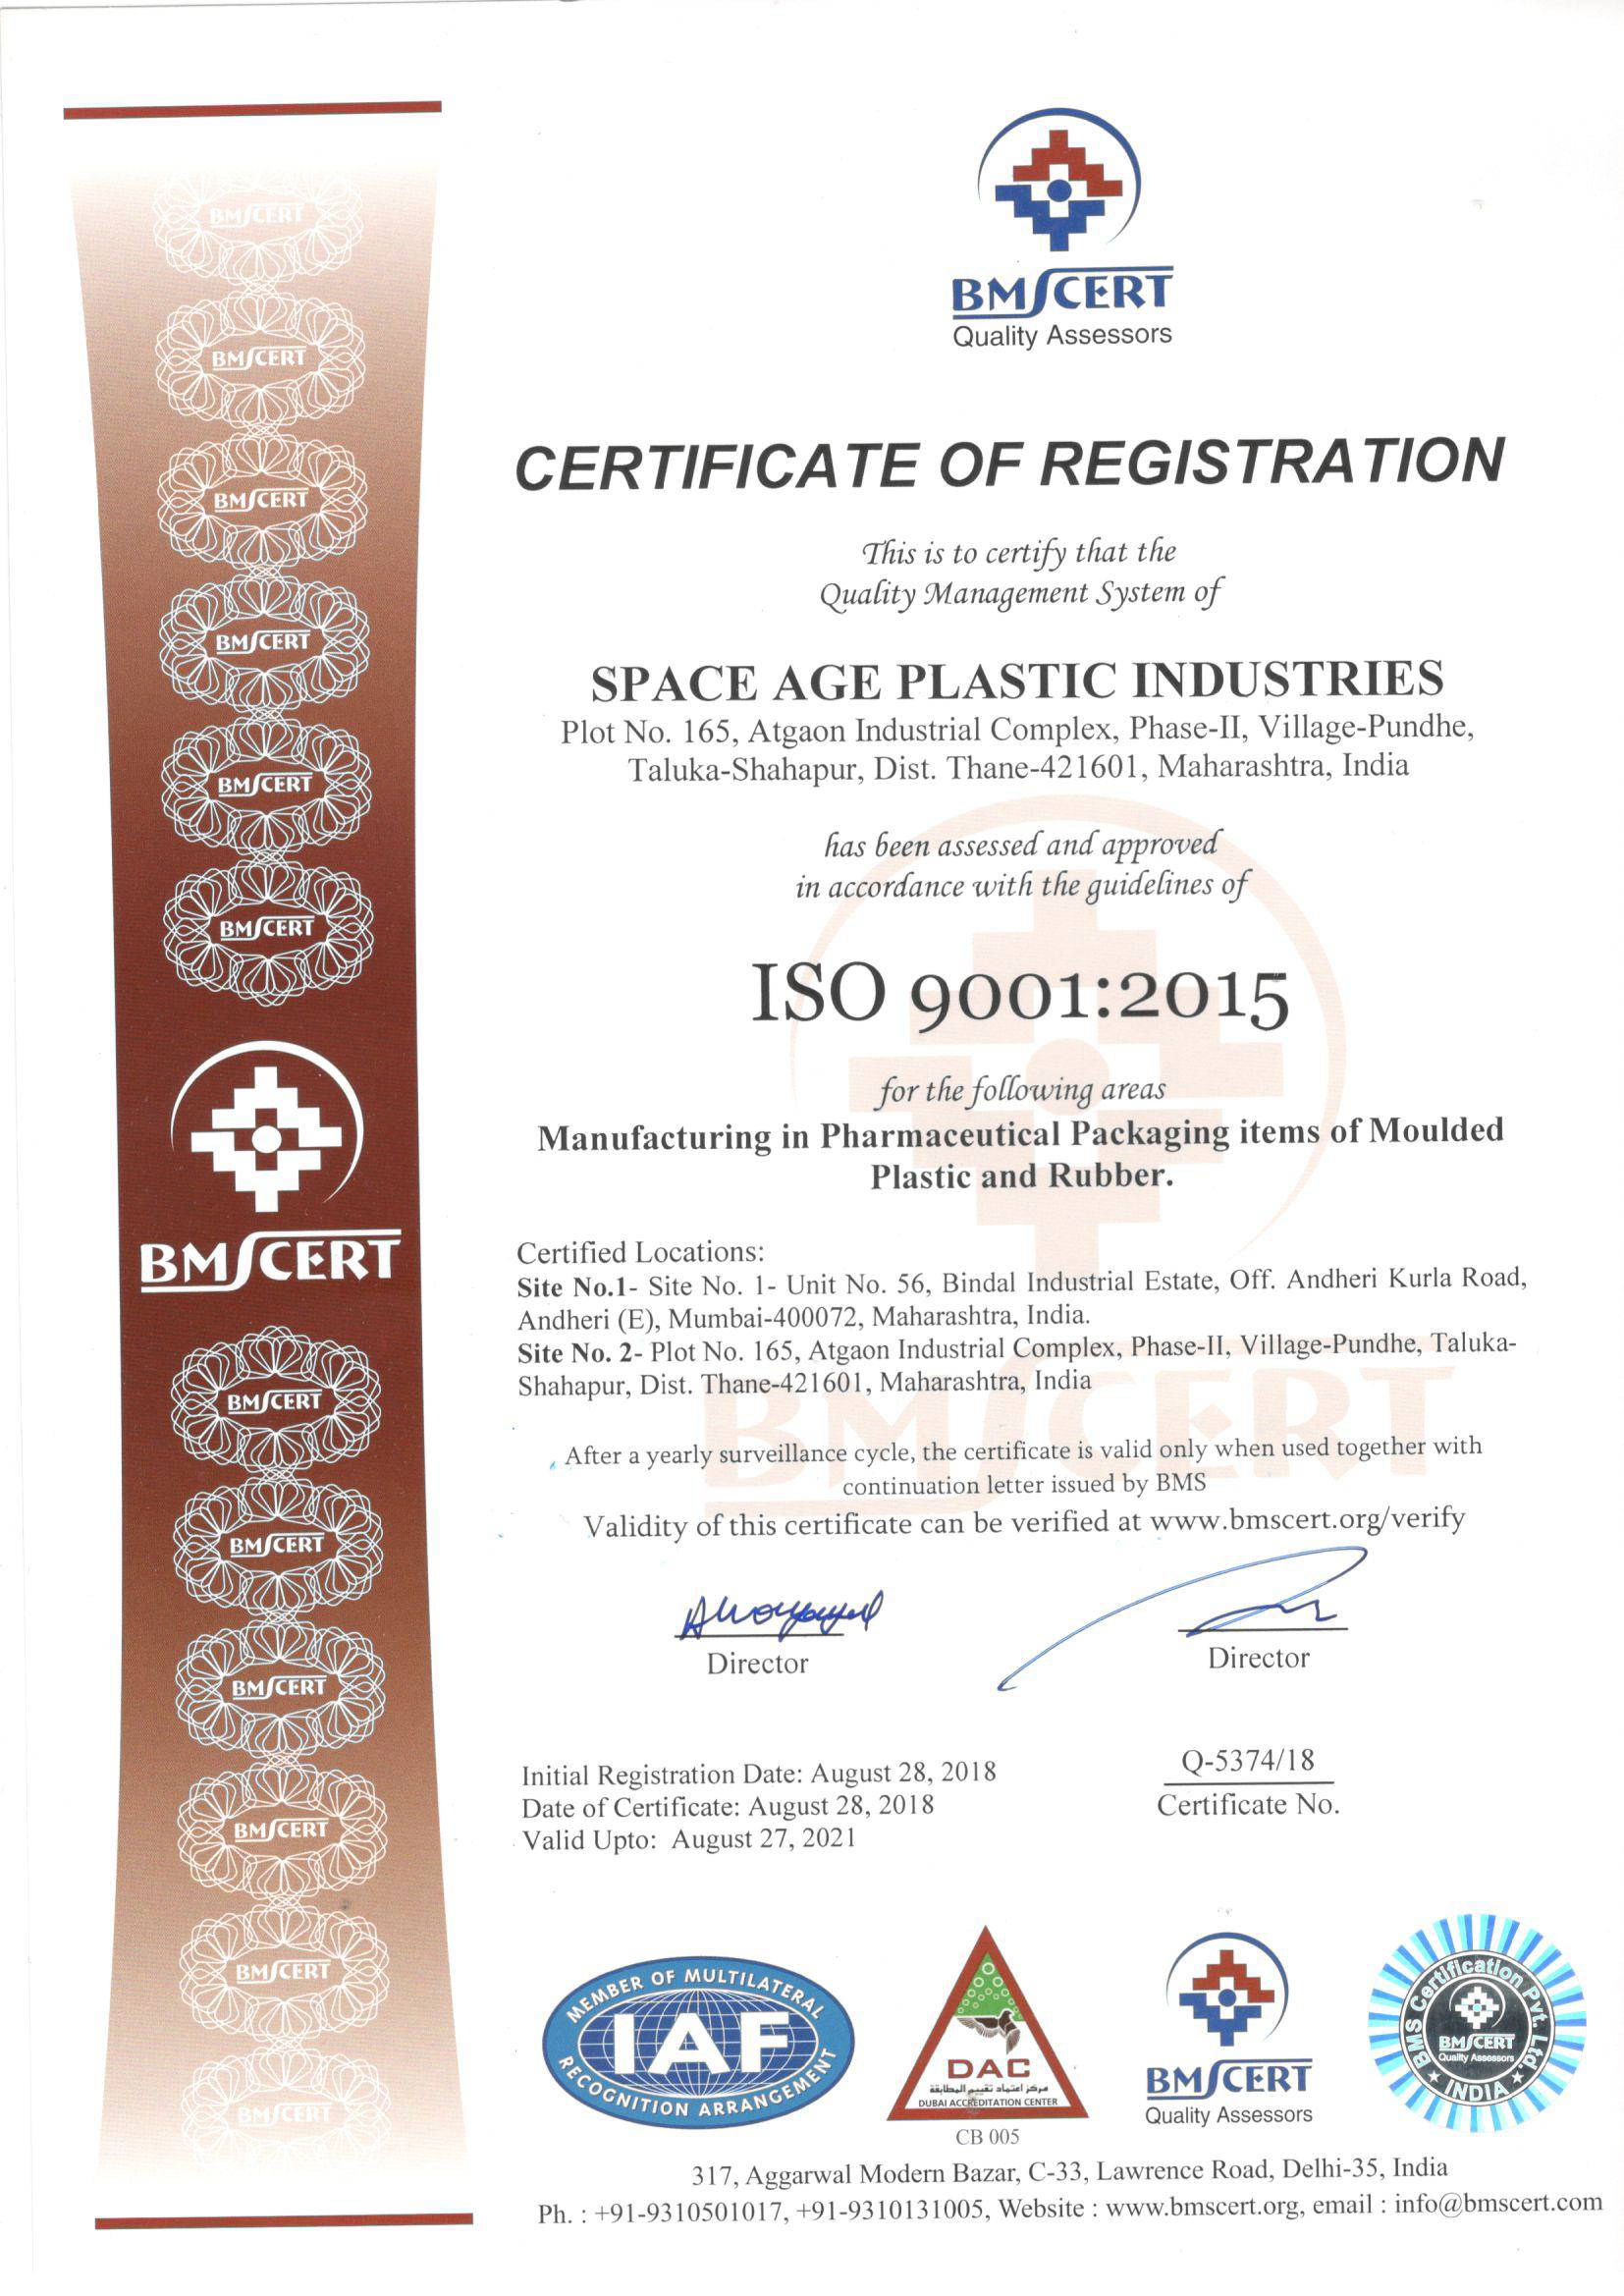 Registration certificate of space age plastic industries